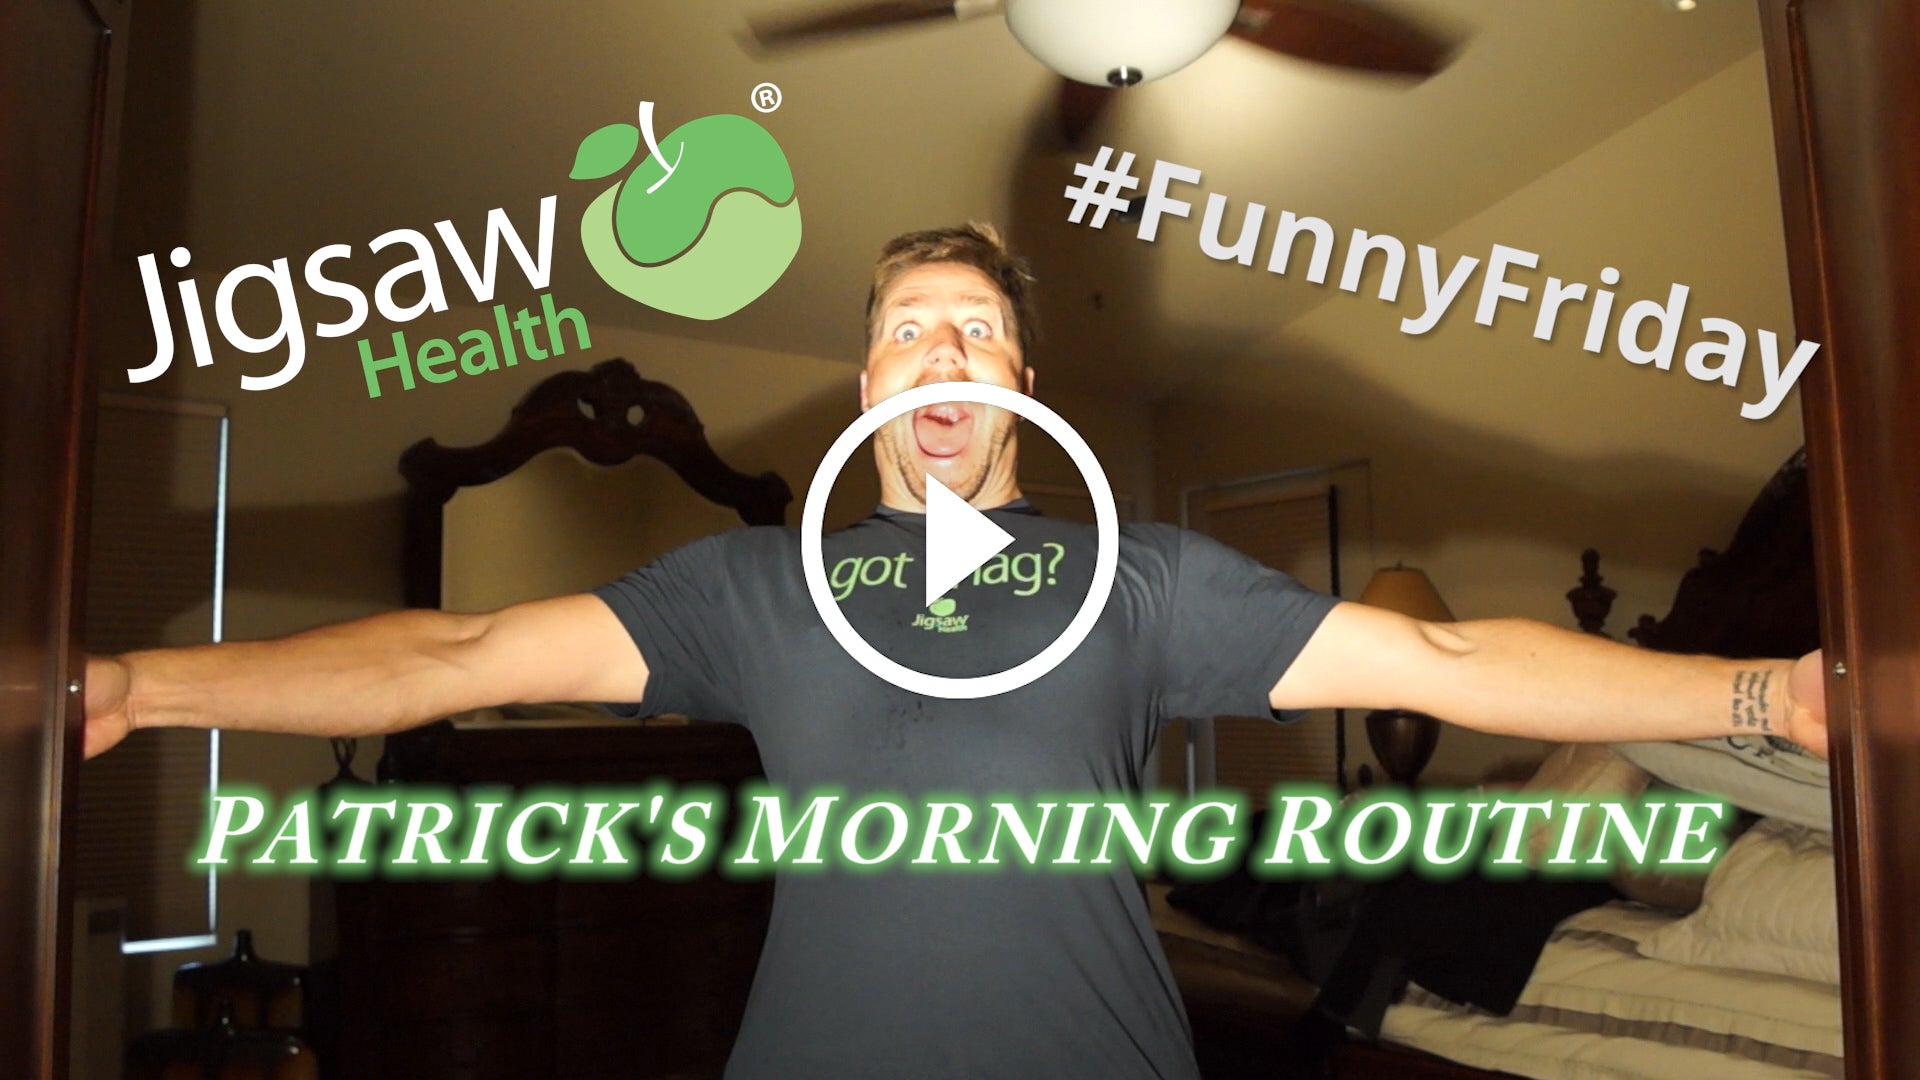 Patrick's Morning Routine #FunnyFriday